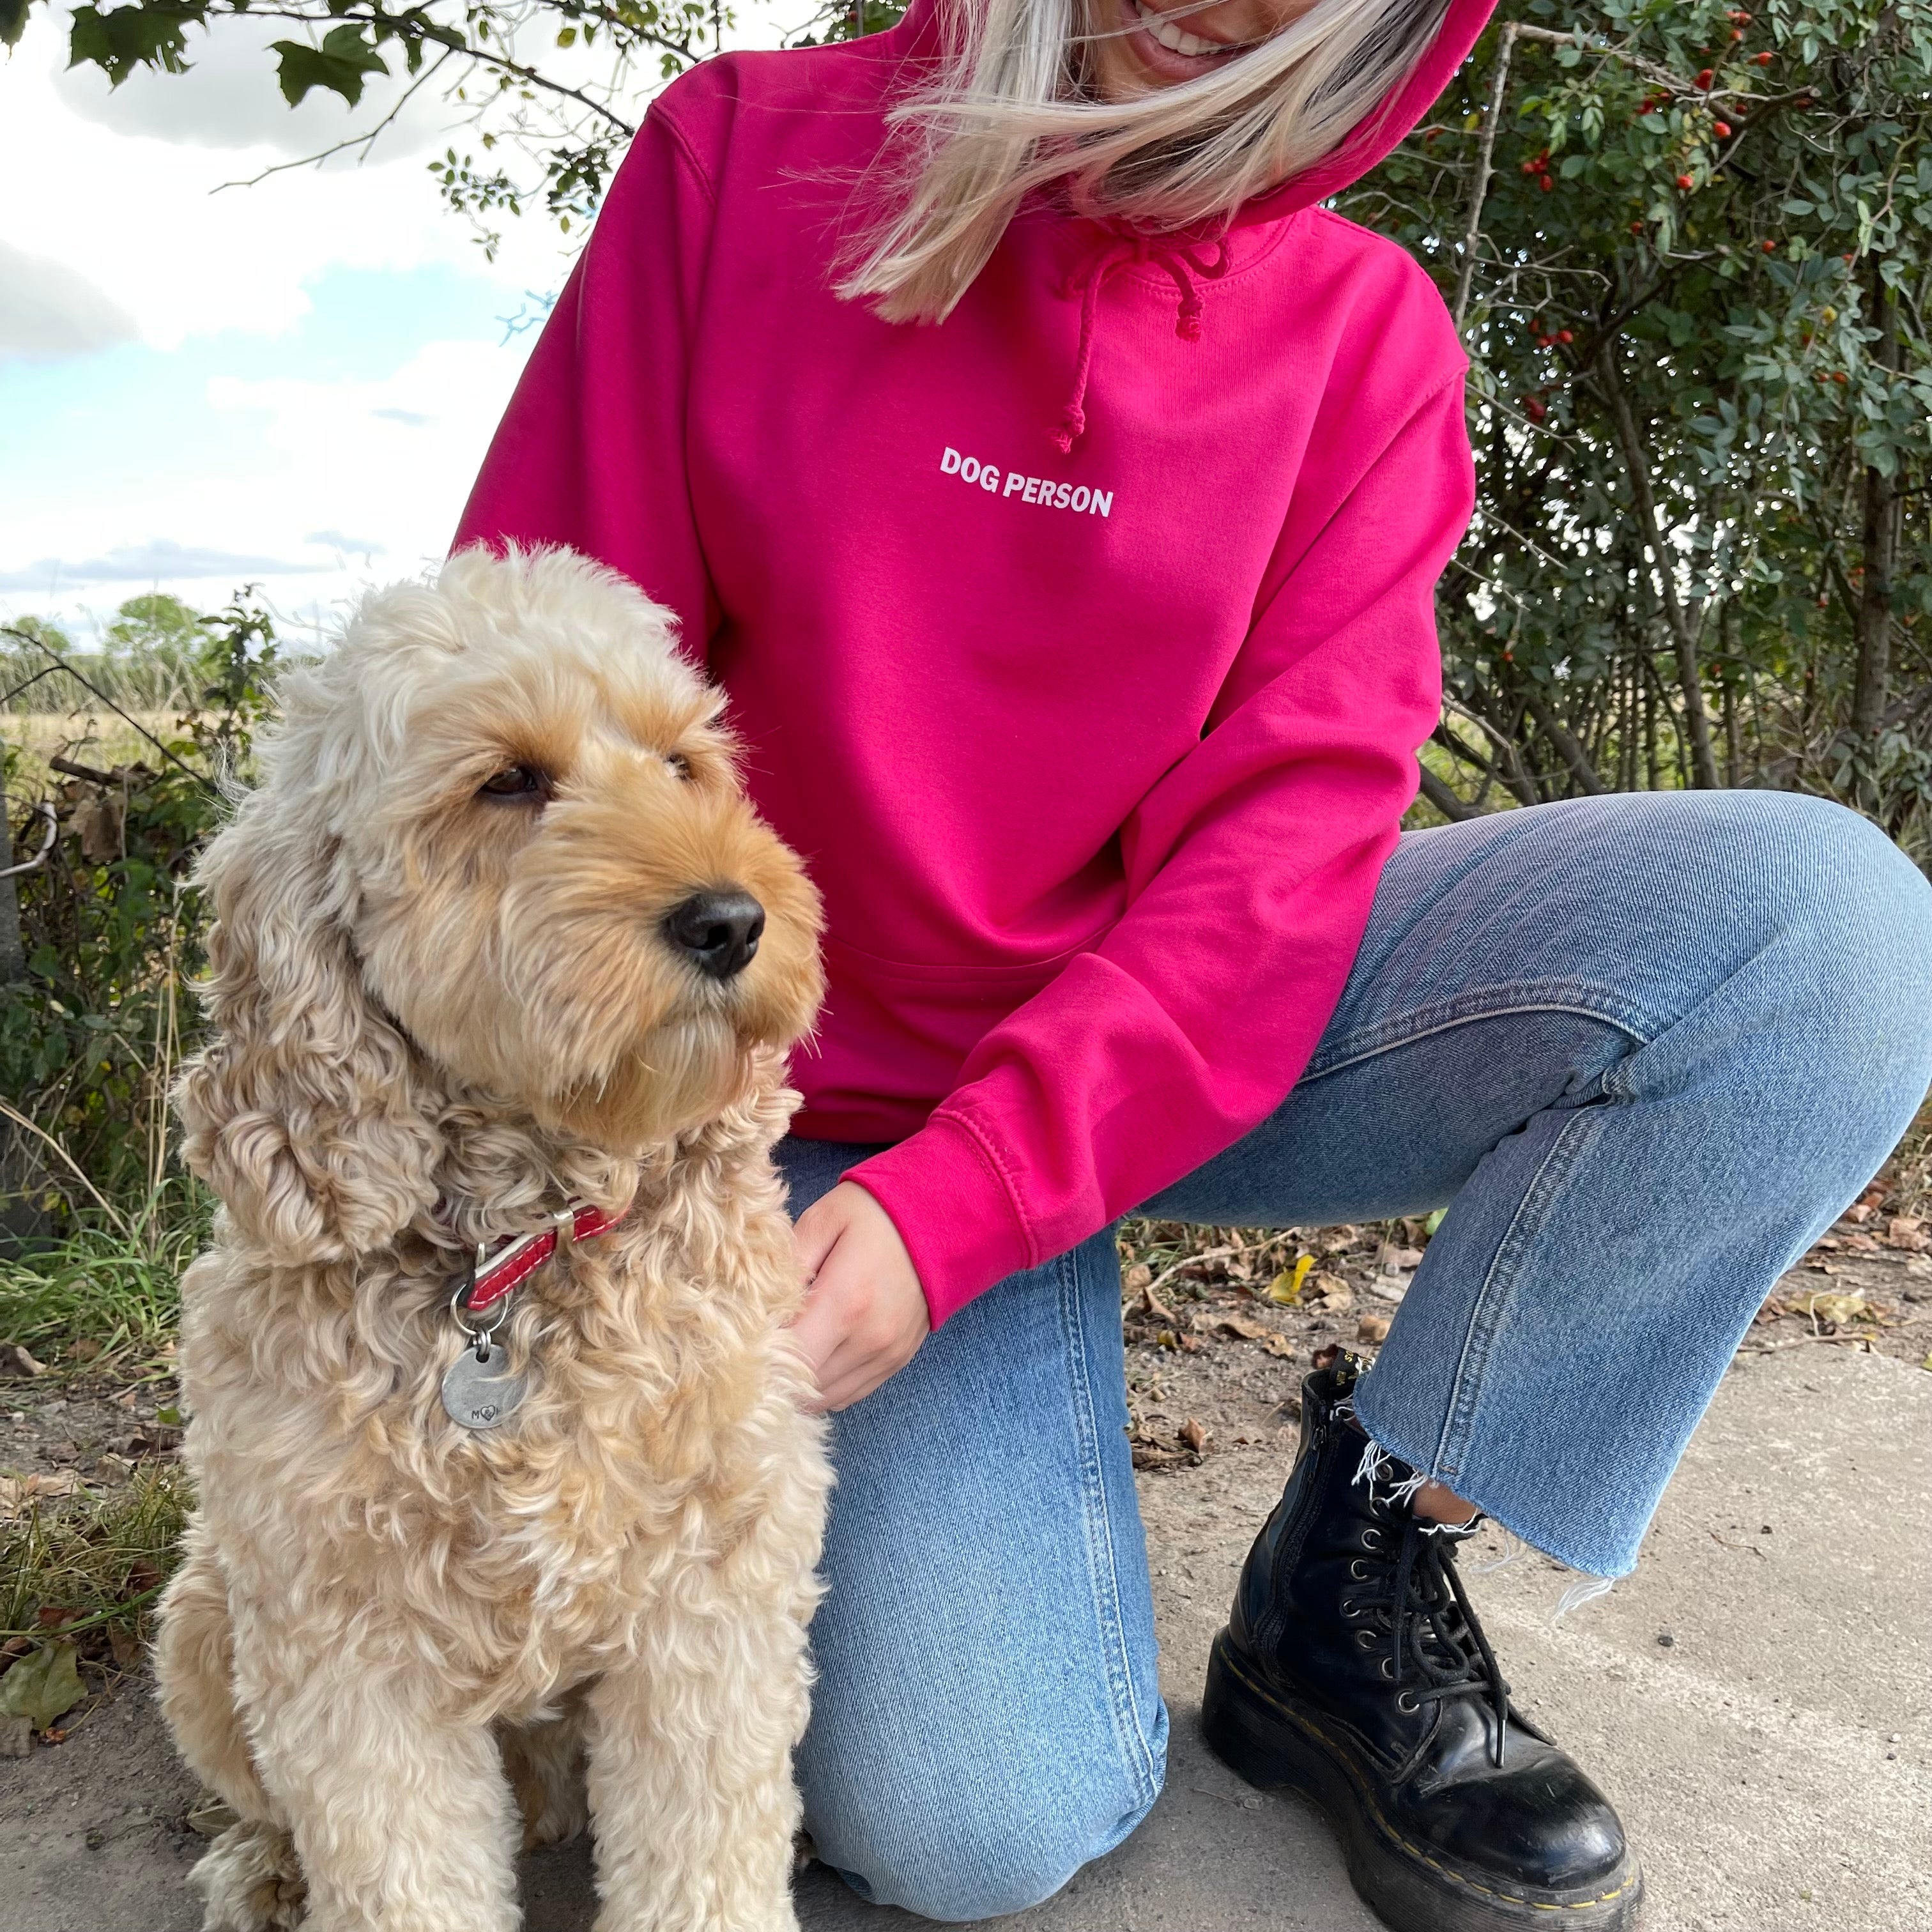 Dog Person Hoody